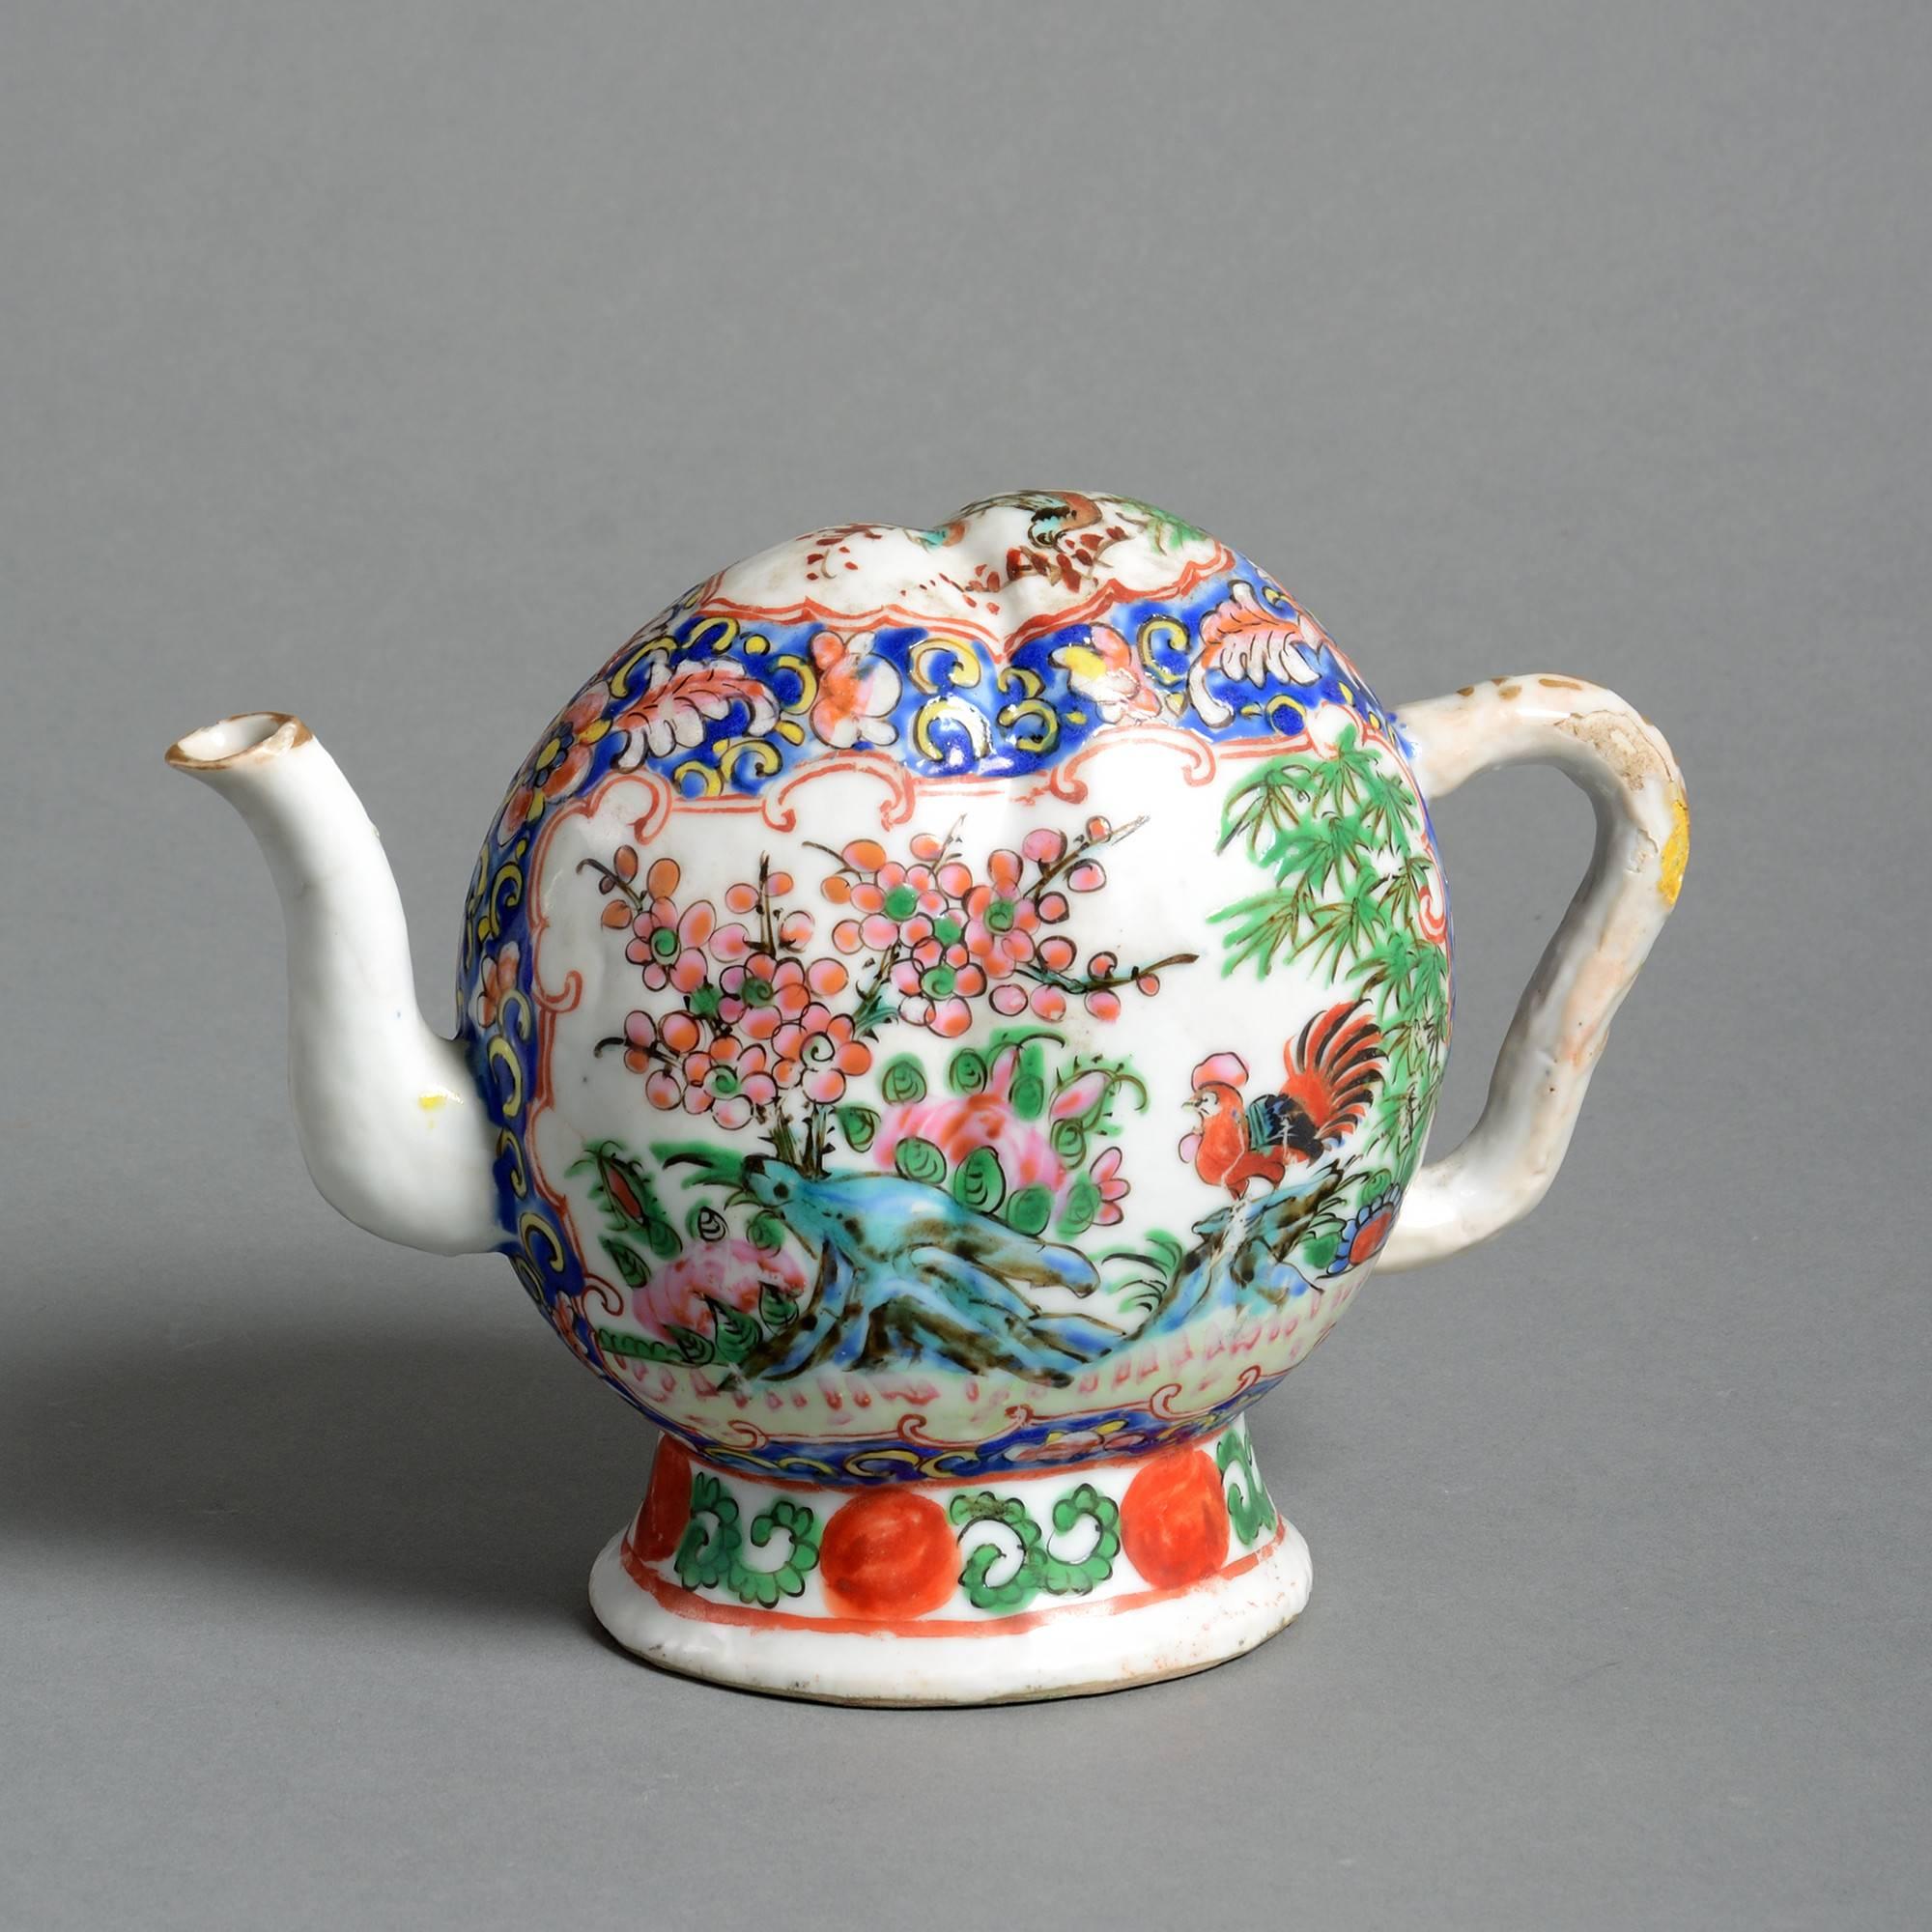 A fine late 19th century famille rose porcelain 'Cadogan' tea pot, decorated throughout with birds and flowers.

Qing dynasty, Guangxu period.